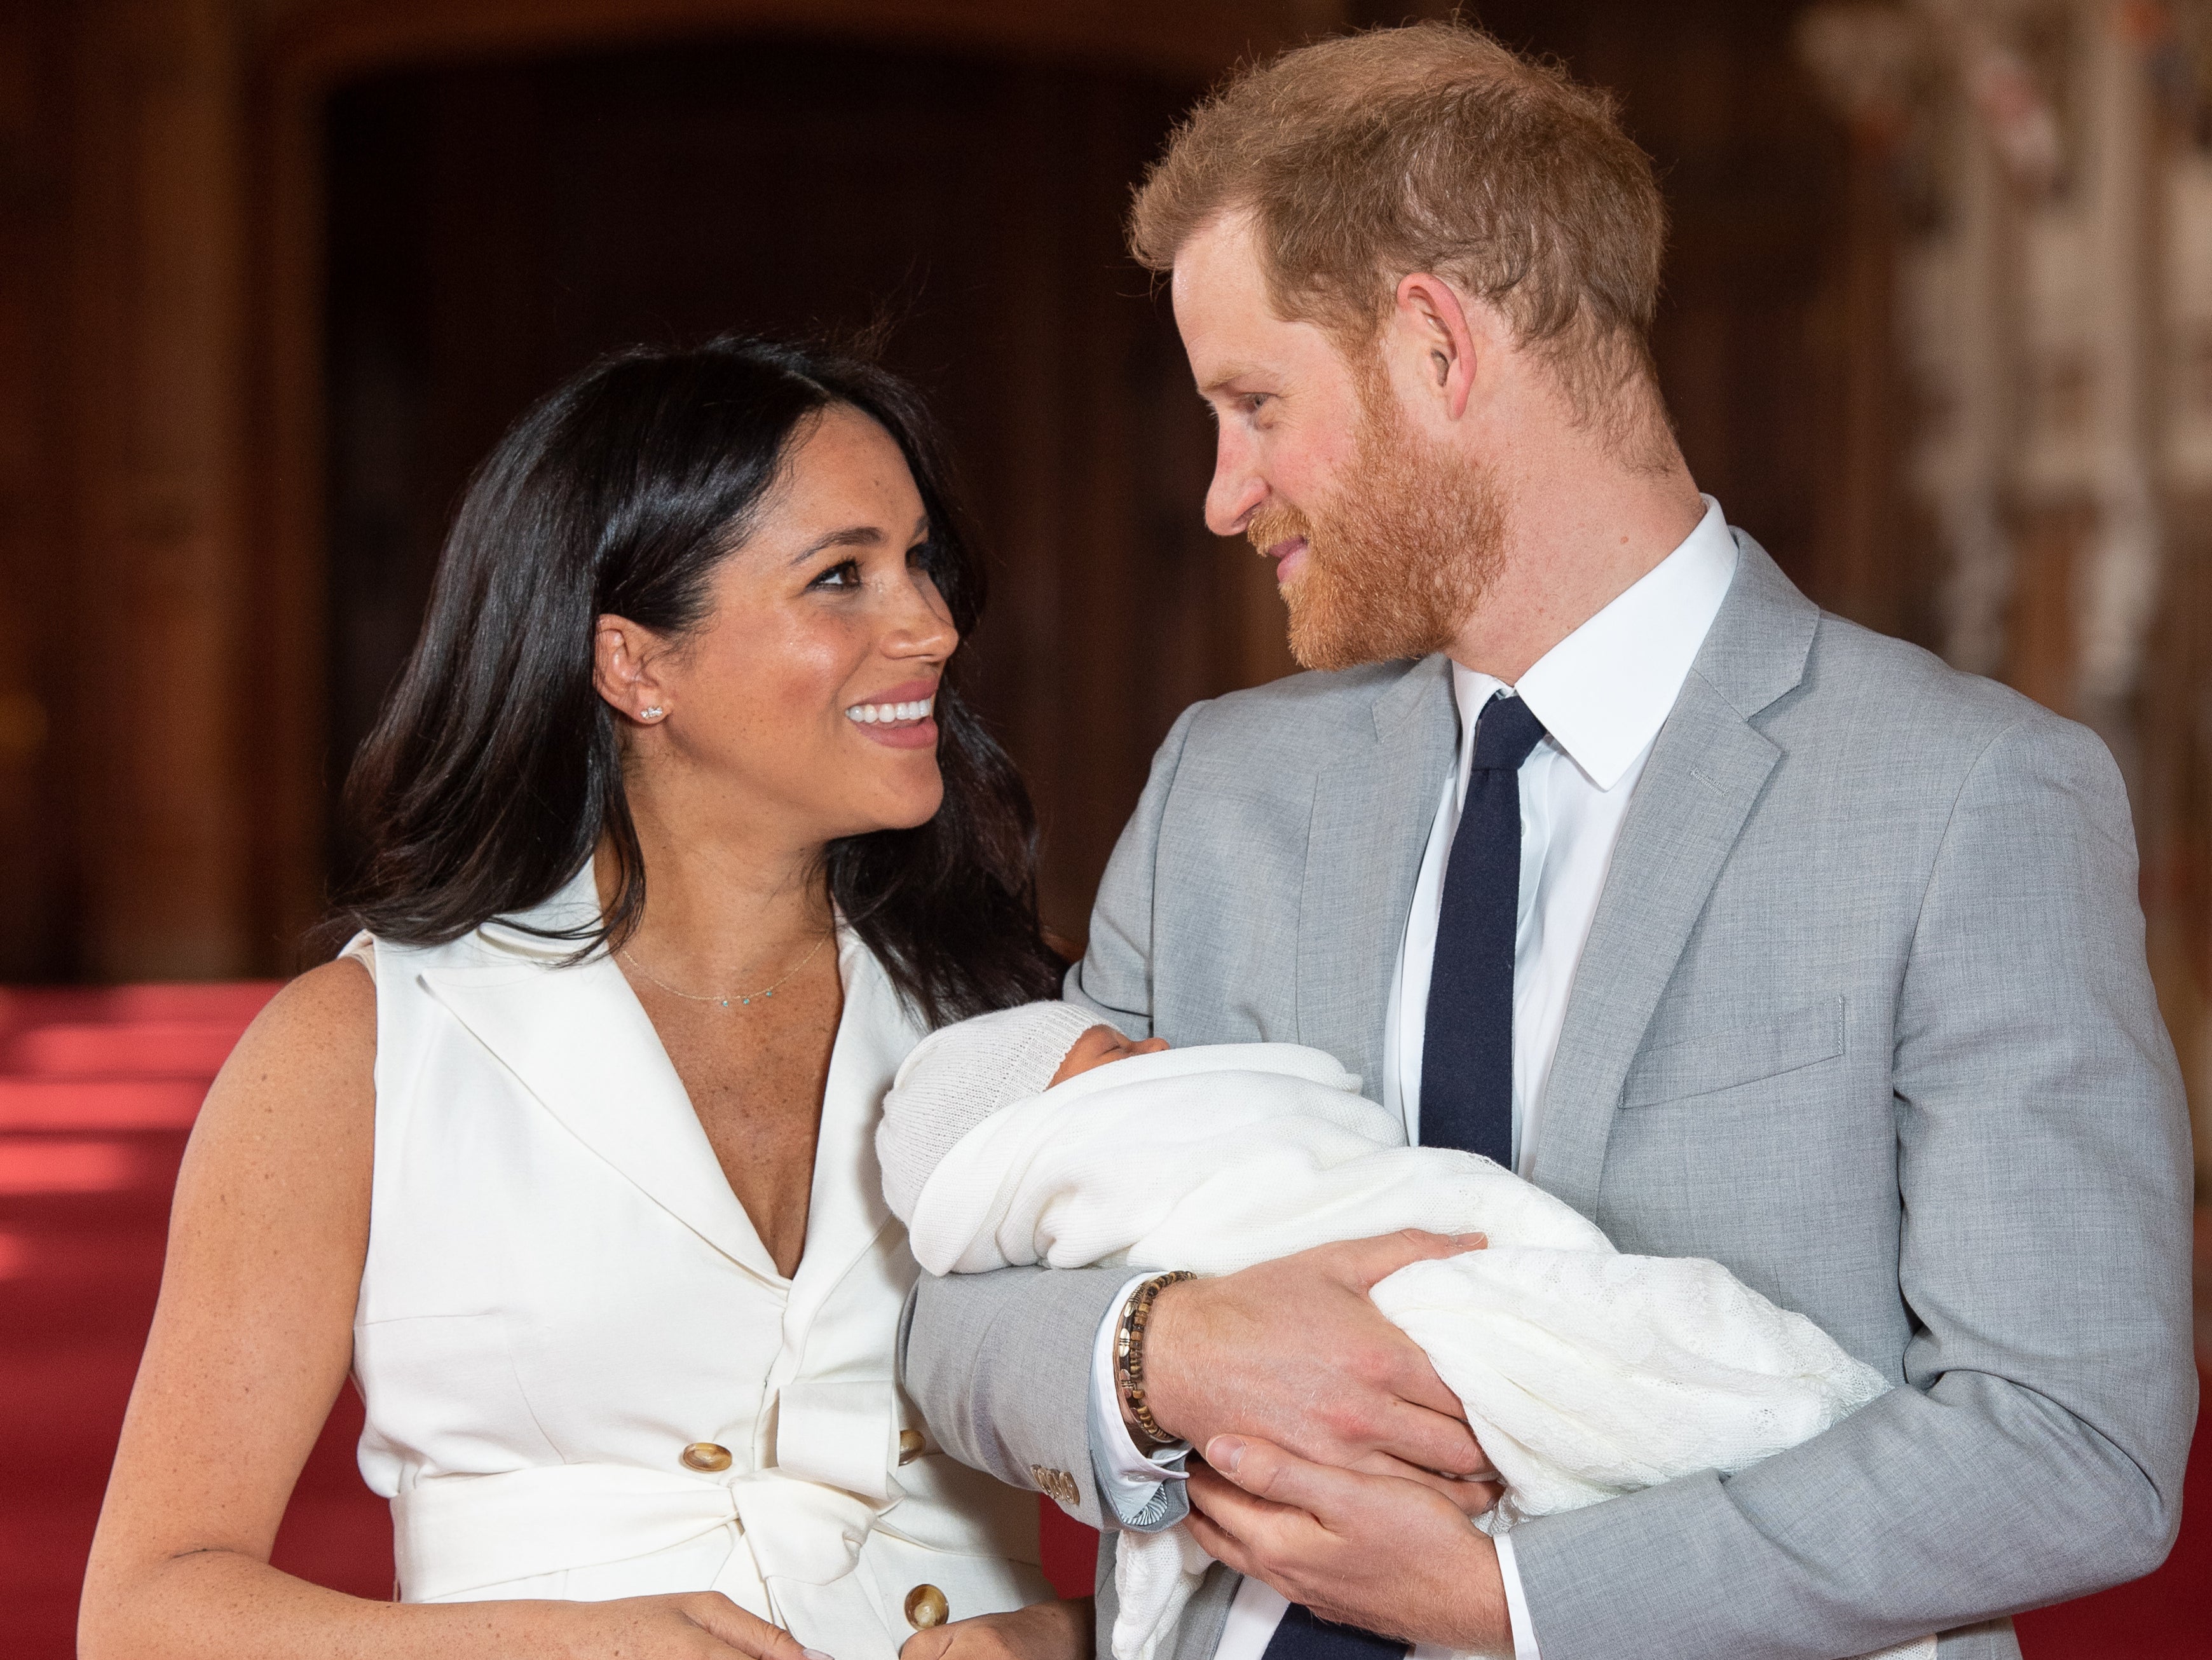 The Duke and Duchess of Sussex pose with their first child, Archie, in May 2019